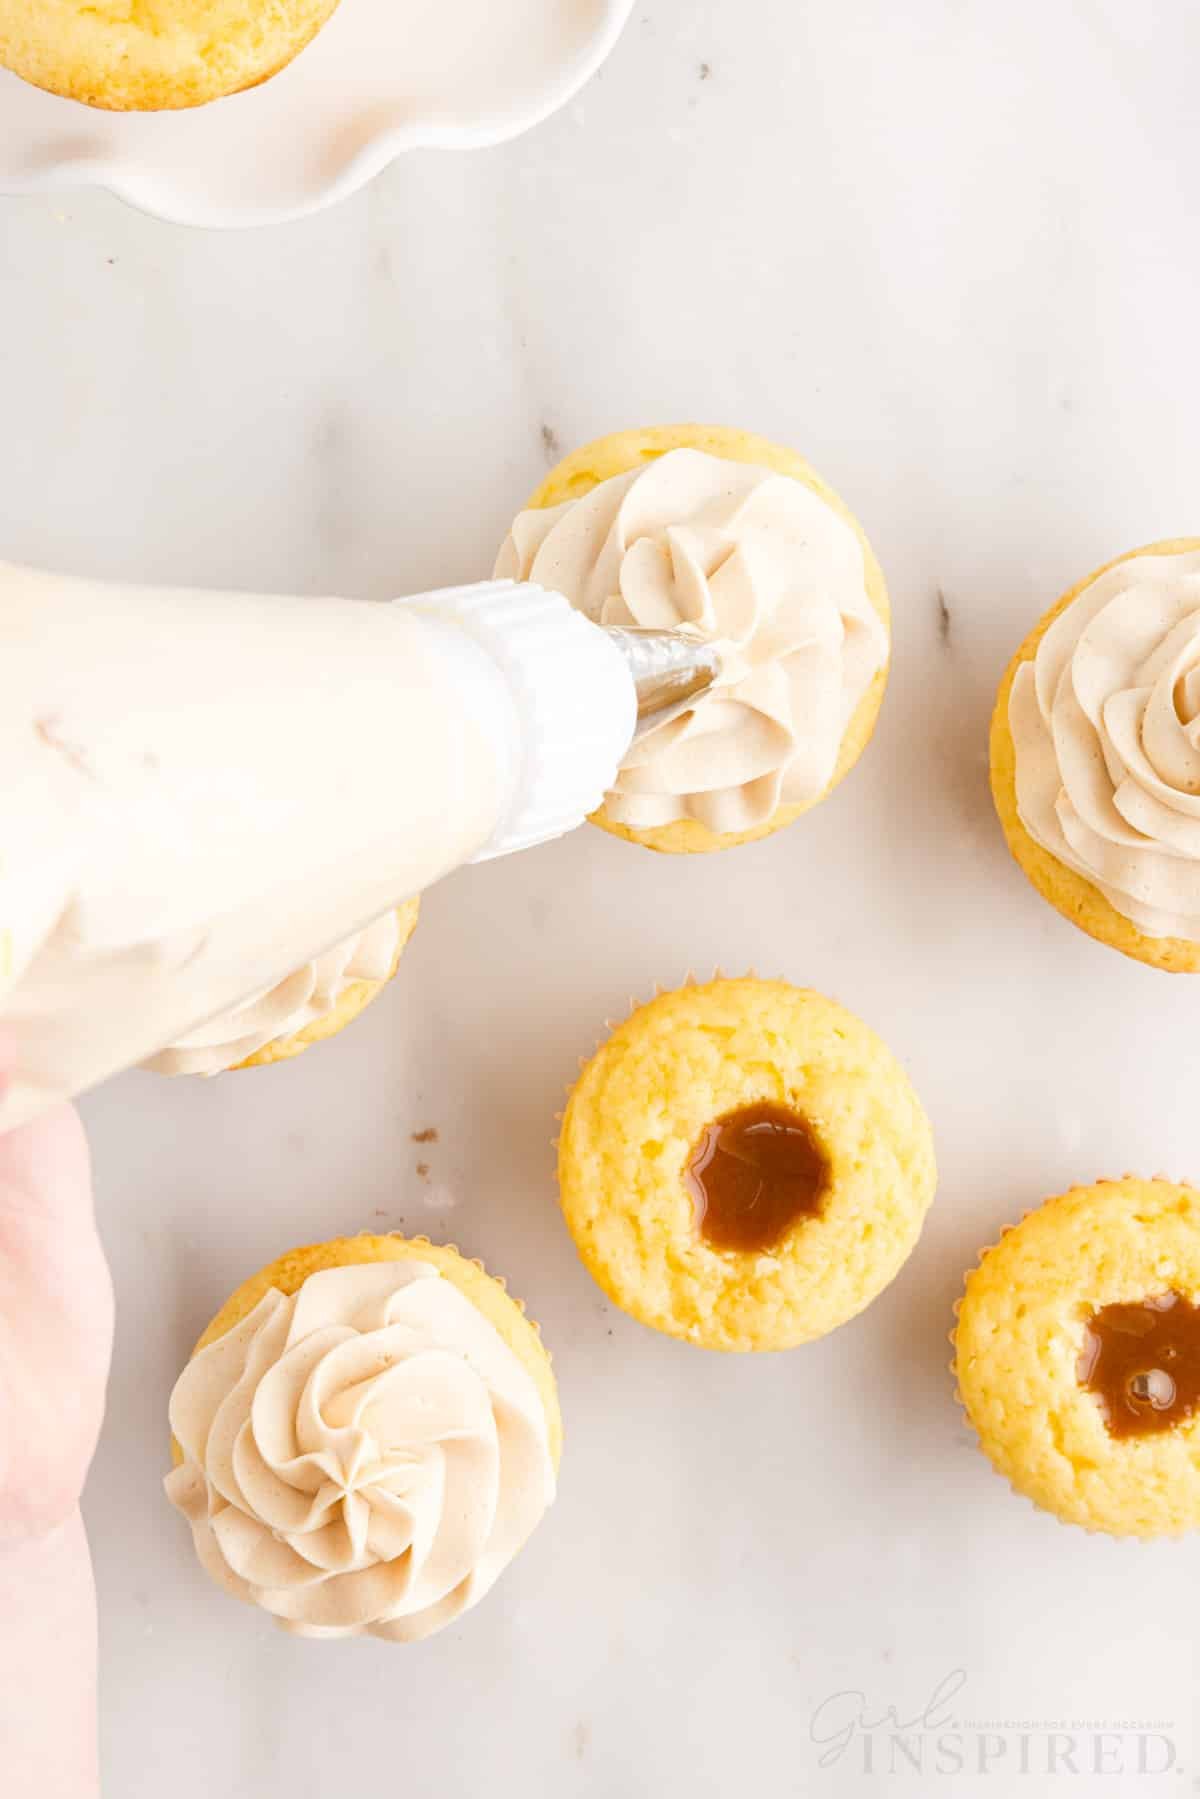 Piping bag frost Salted Caramel Cupcakes.